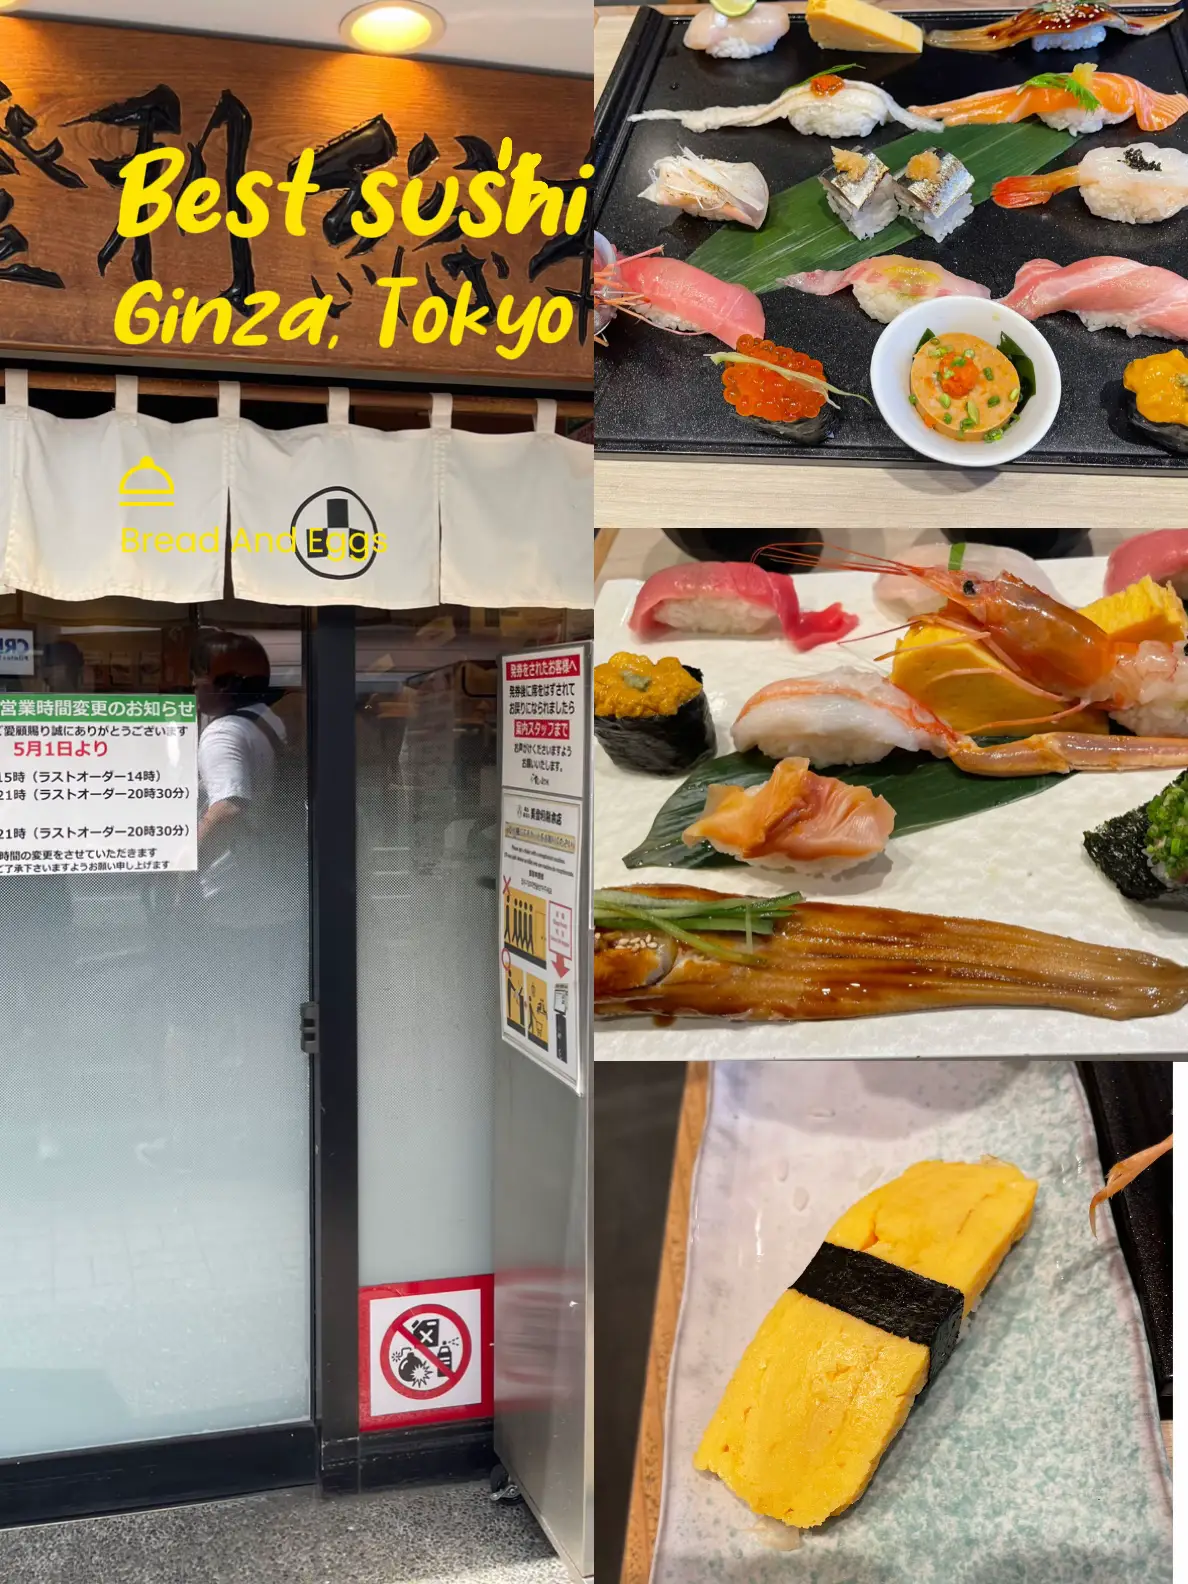 Best sushi in Ginza (super affordable too!) | Gallery posted by